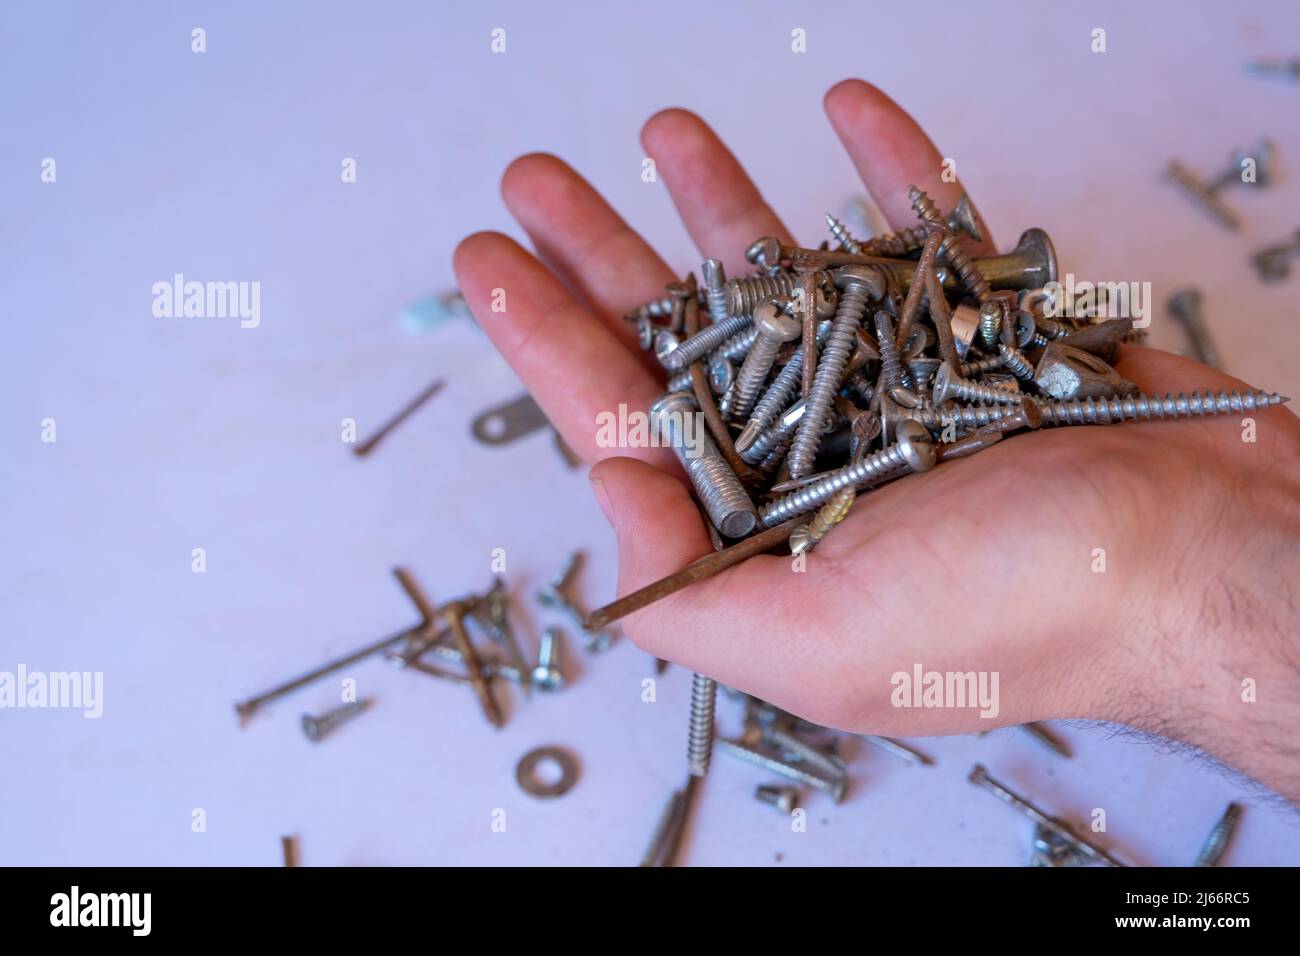 Joist Hanger Screws Vs. Nails: Which Do You Need?